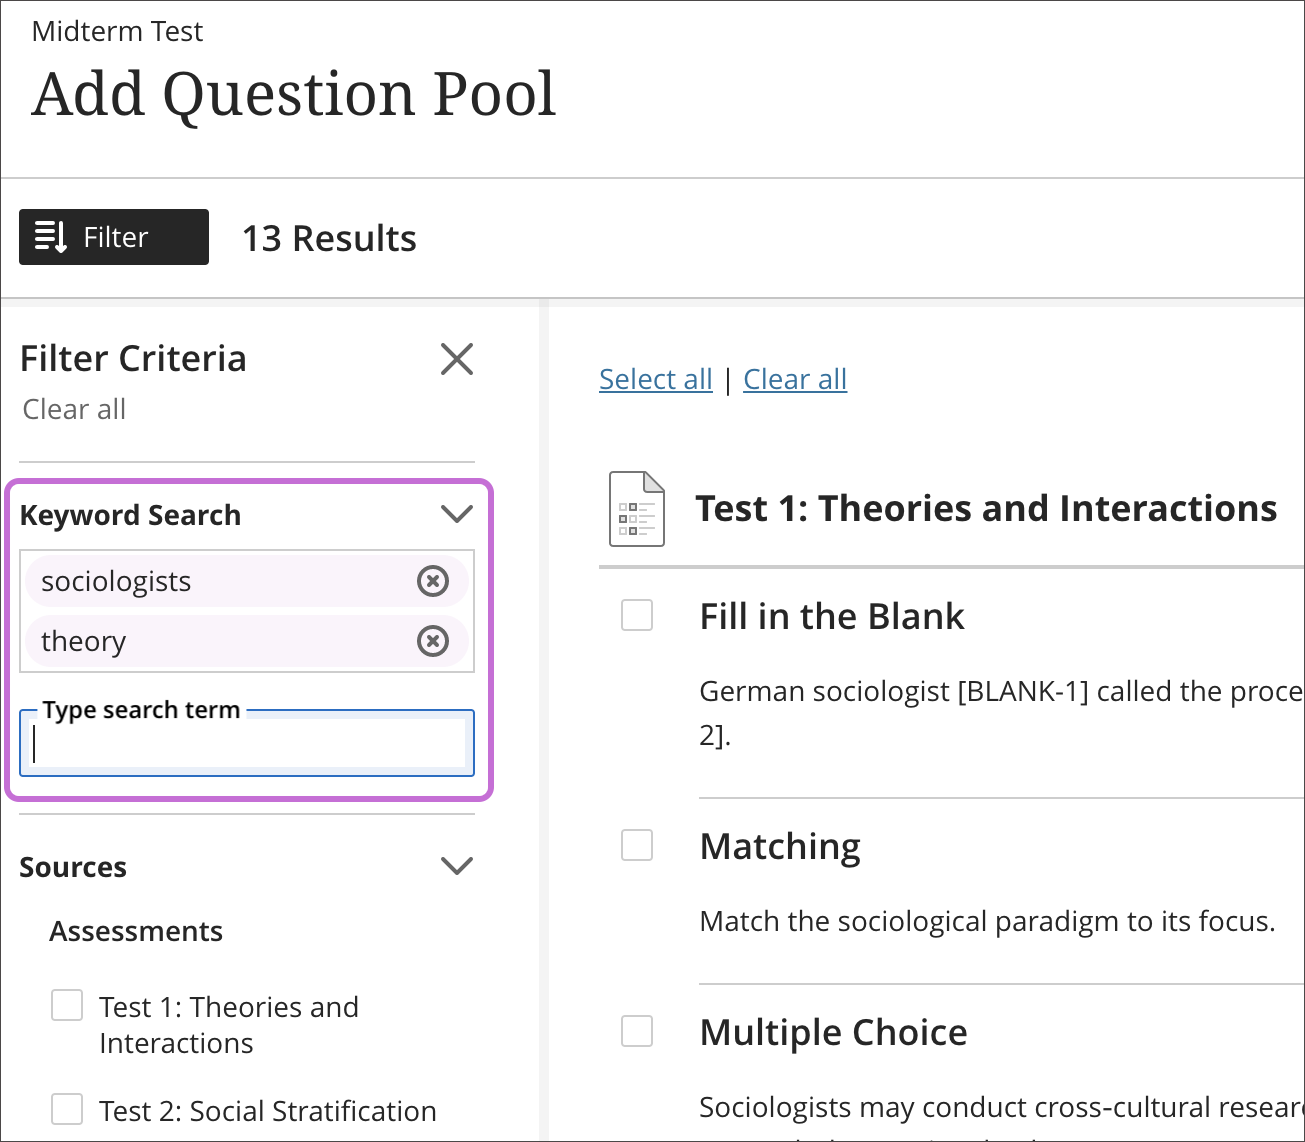 Add question pool panel is open with the filter criteria panel open. The keyword search section is highlighted.